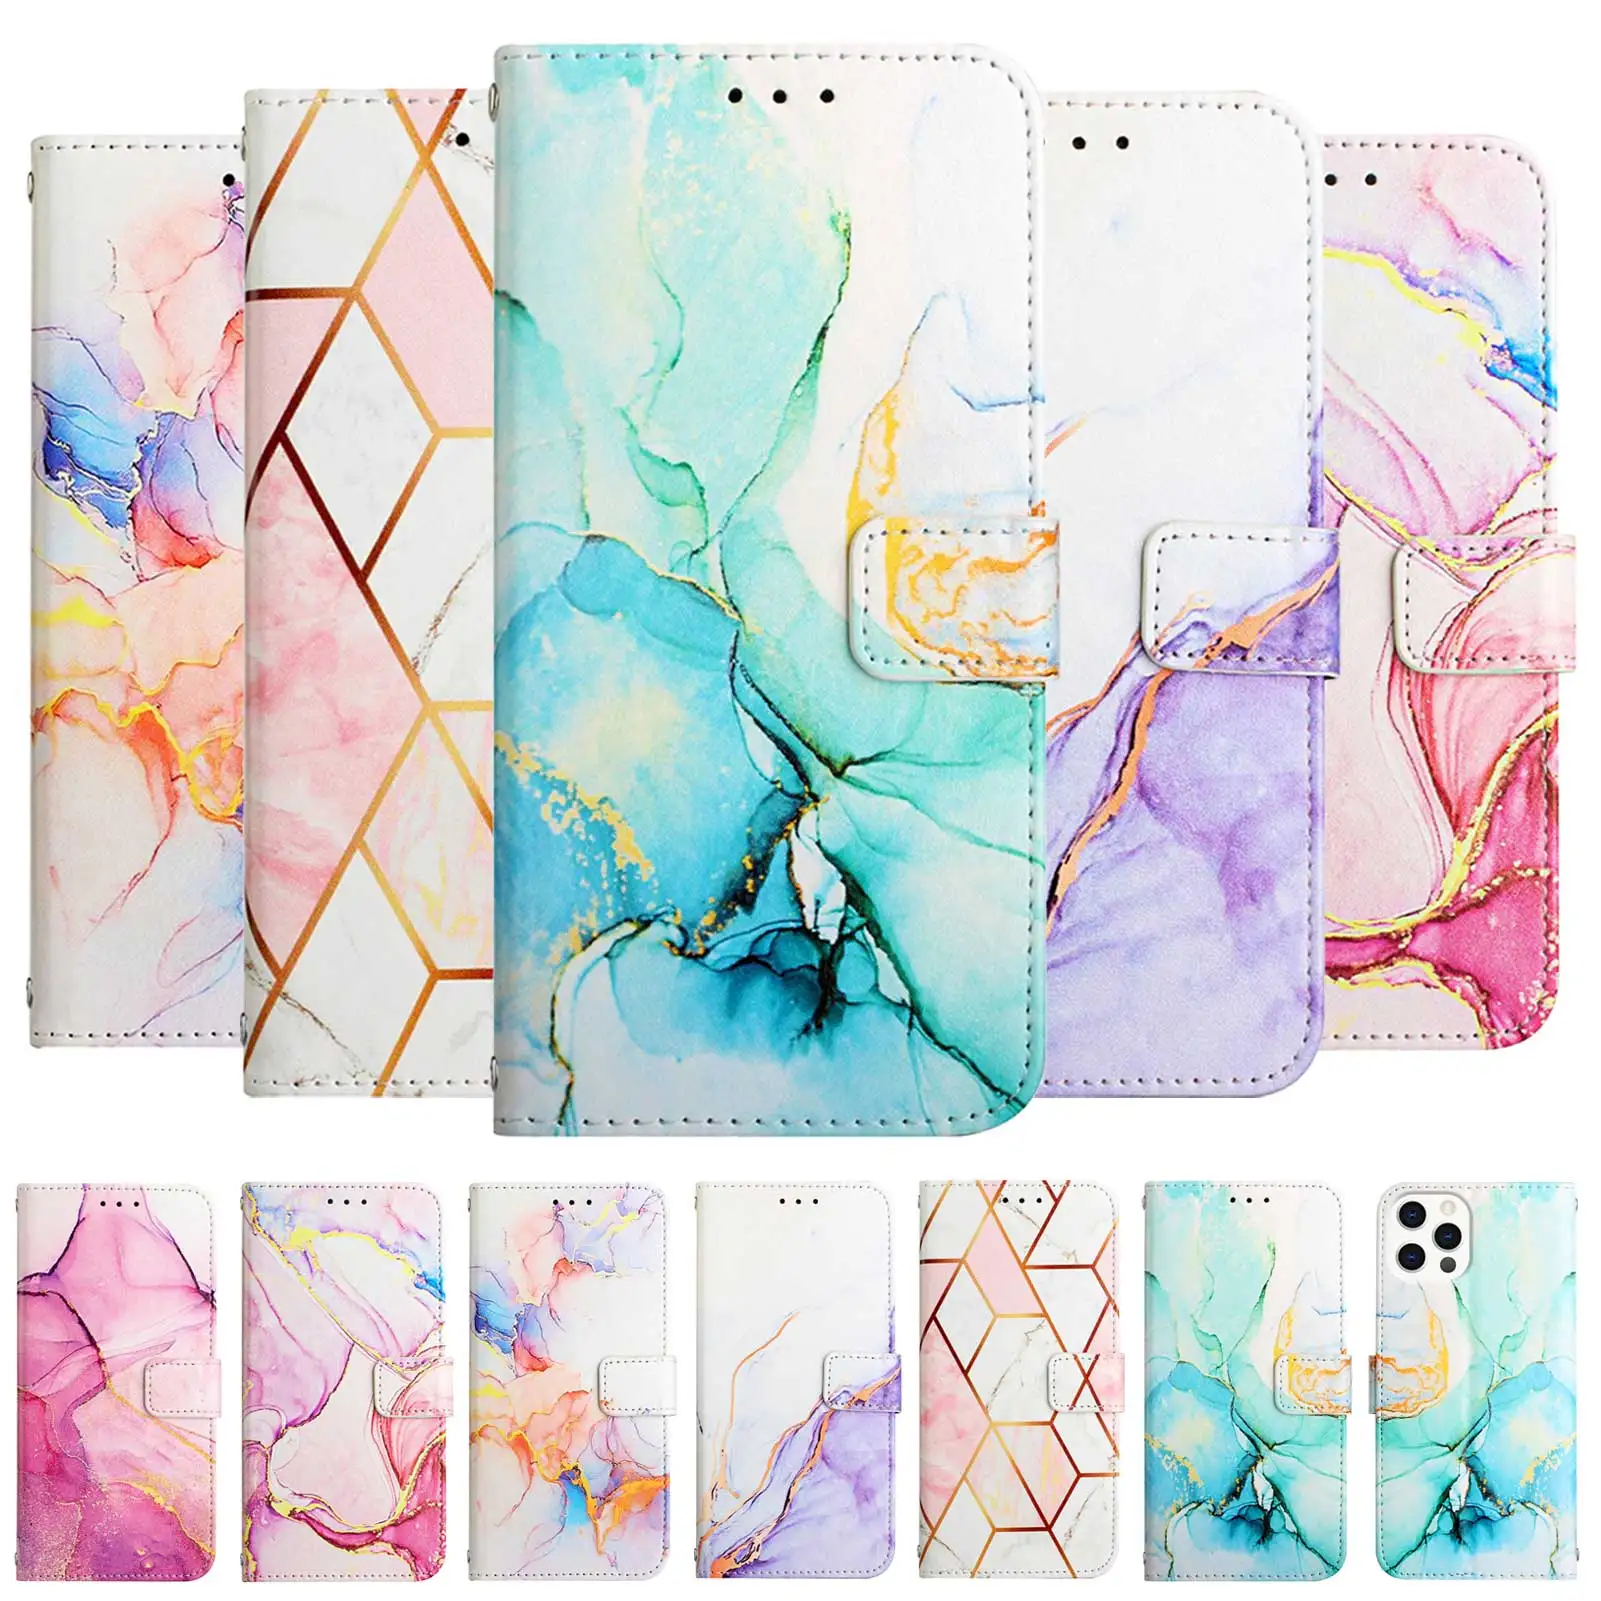 

Marble Card Slot Stand Case For Nokia G11 G21 G10 G20 G50 G300 X10 X20 XR20 C01 Plus C20 Plus C20 C30 1.4 Leather Wallet Cover